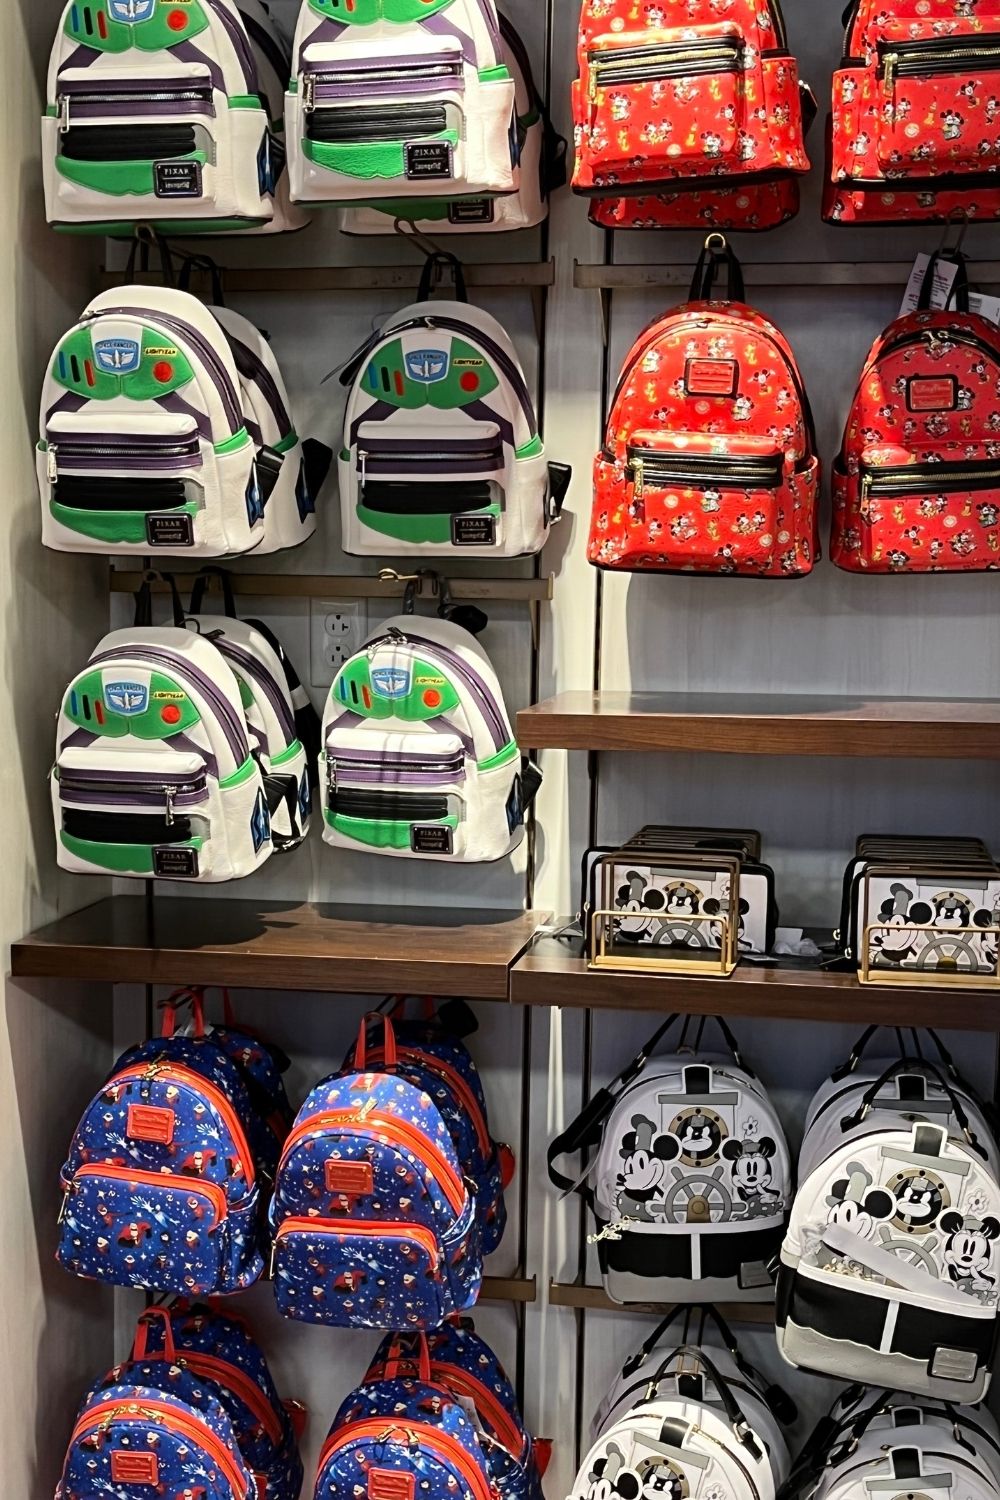 Disney Loungefly bags for sale at Disney World